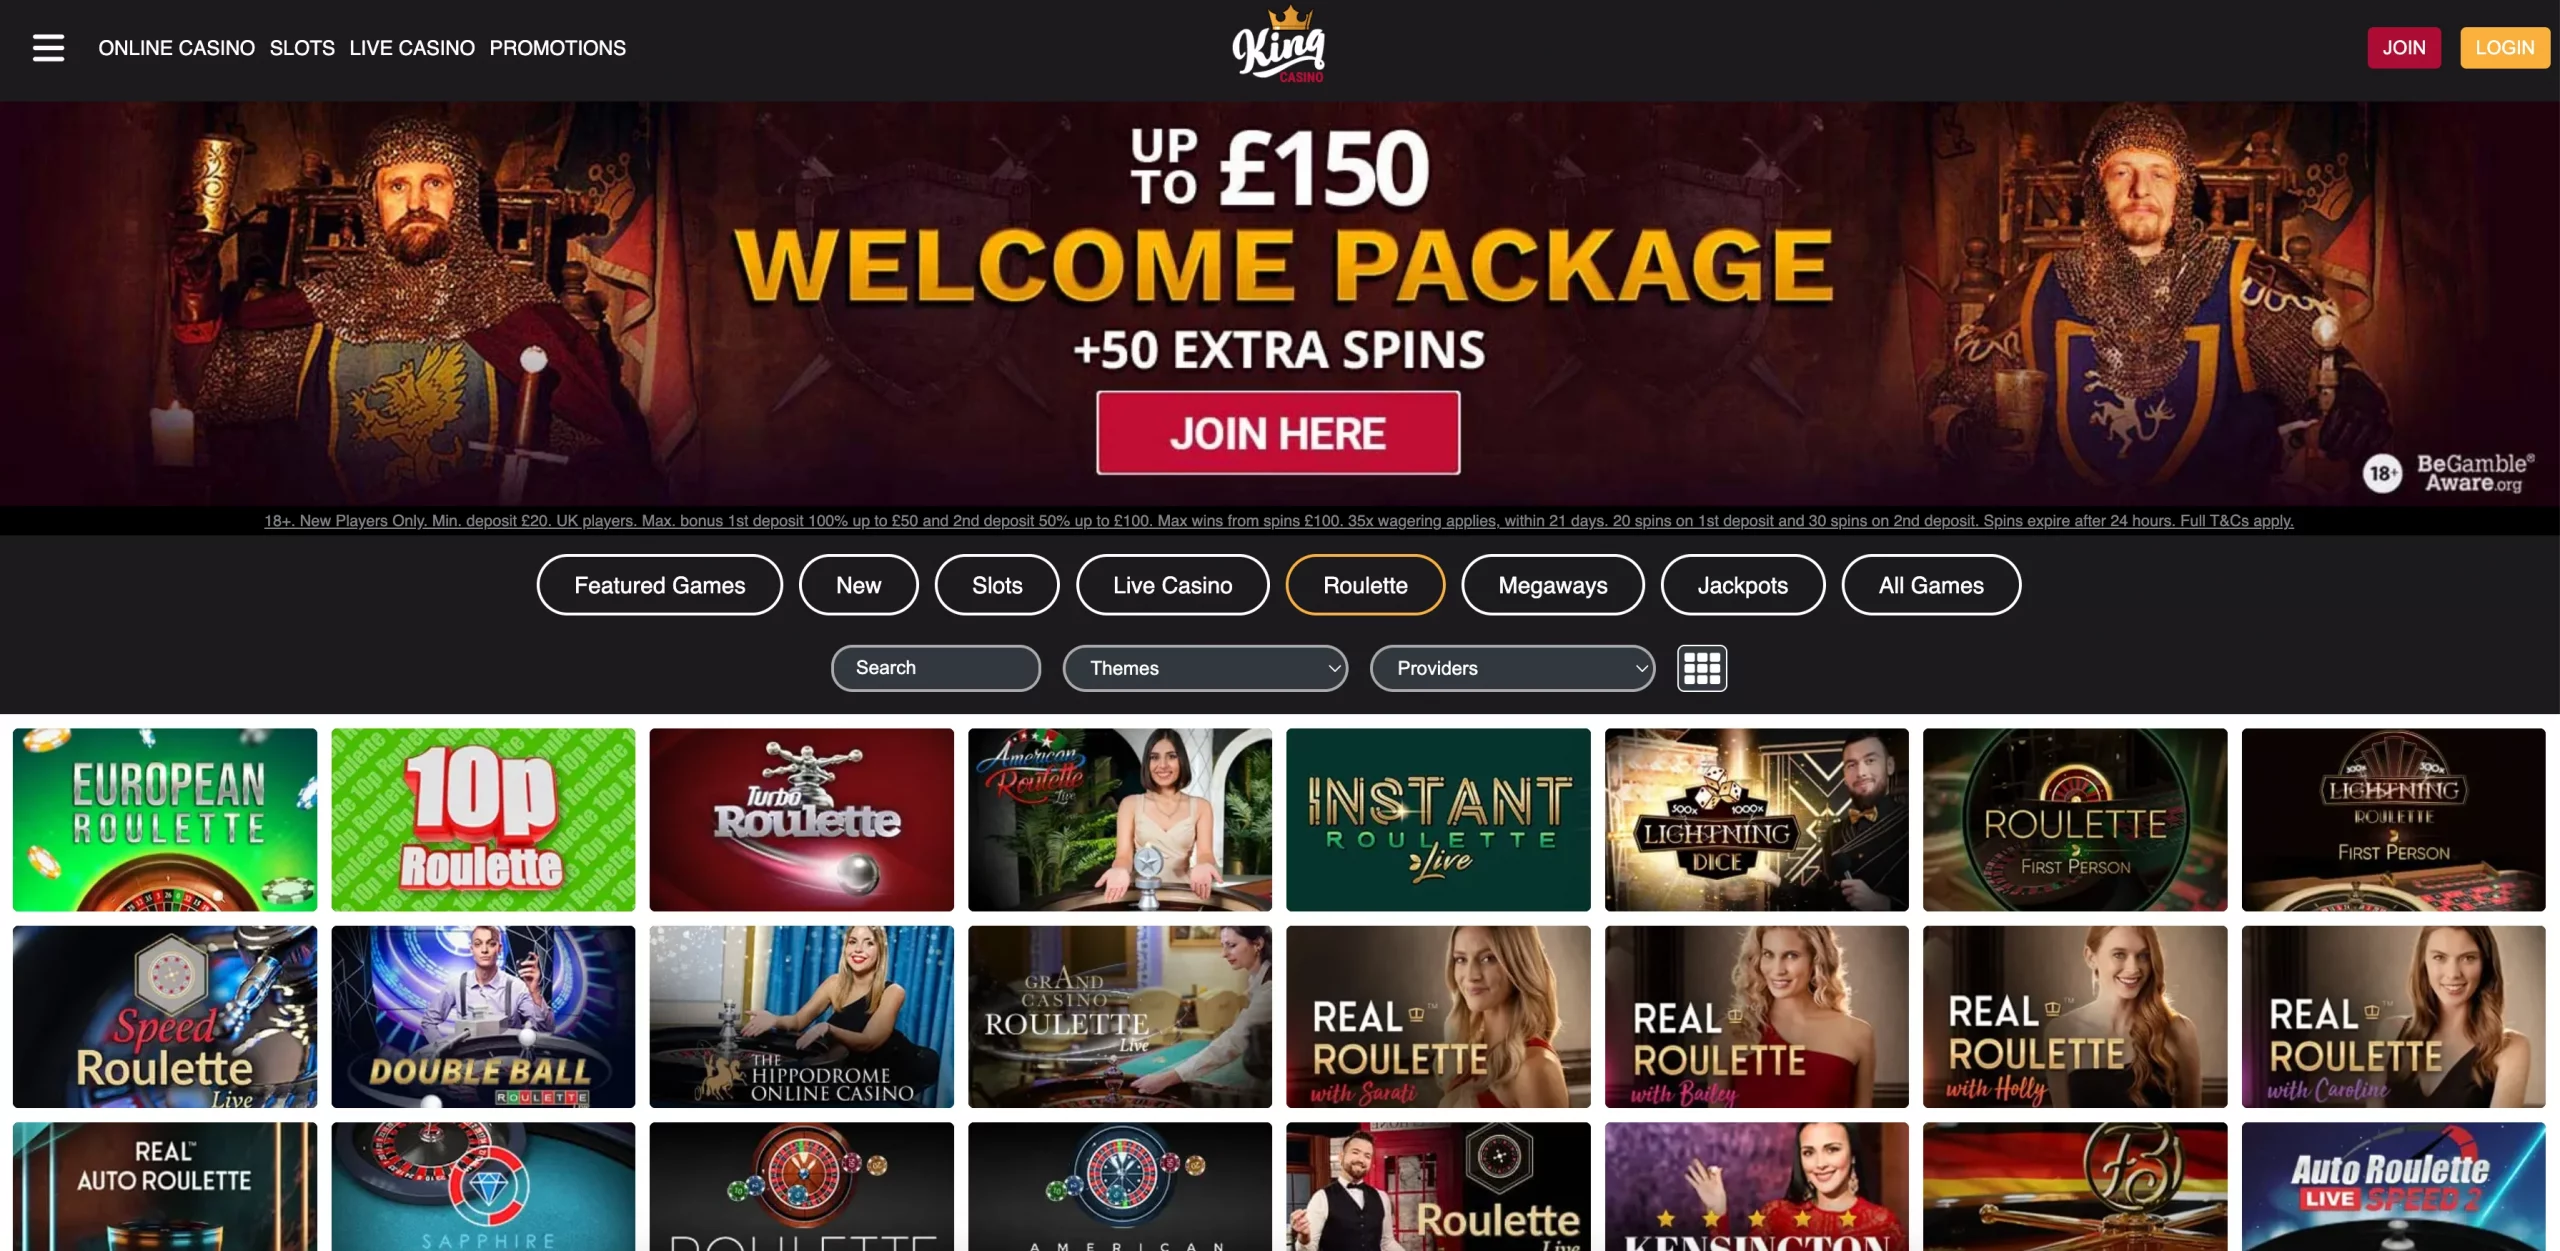 History and background of King Casino UK